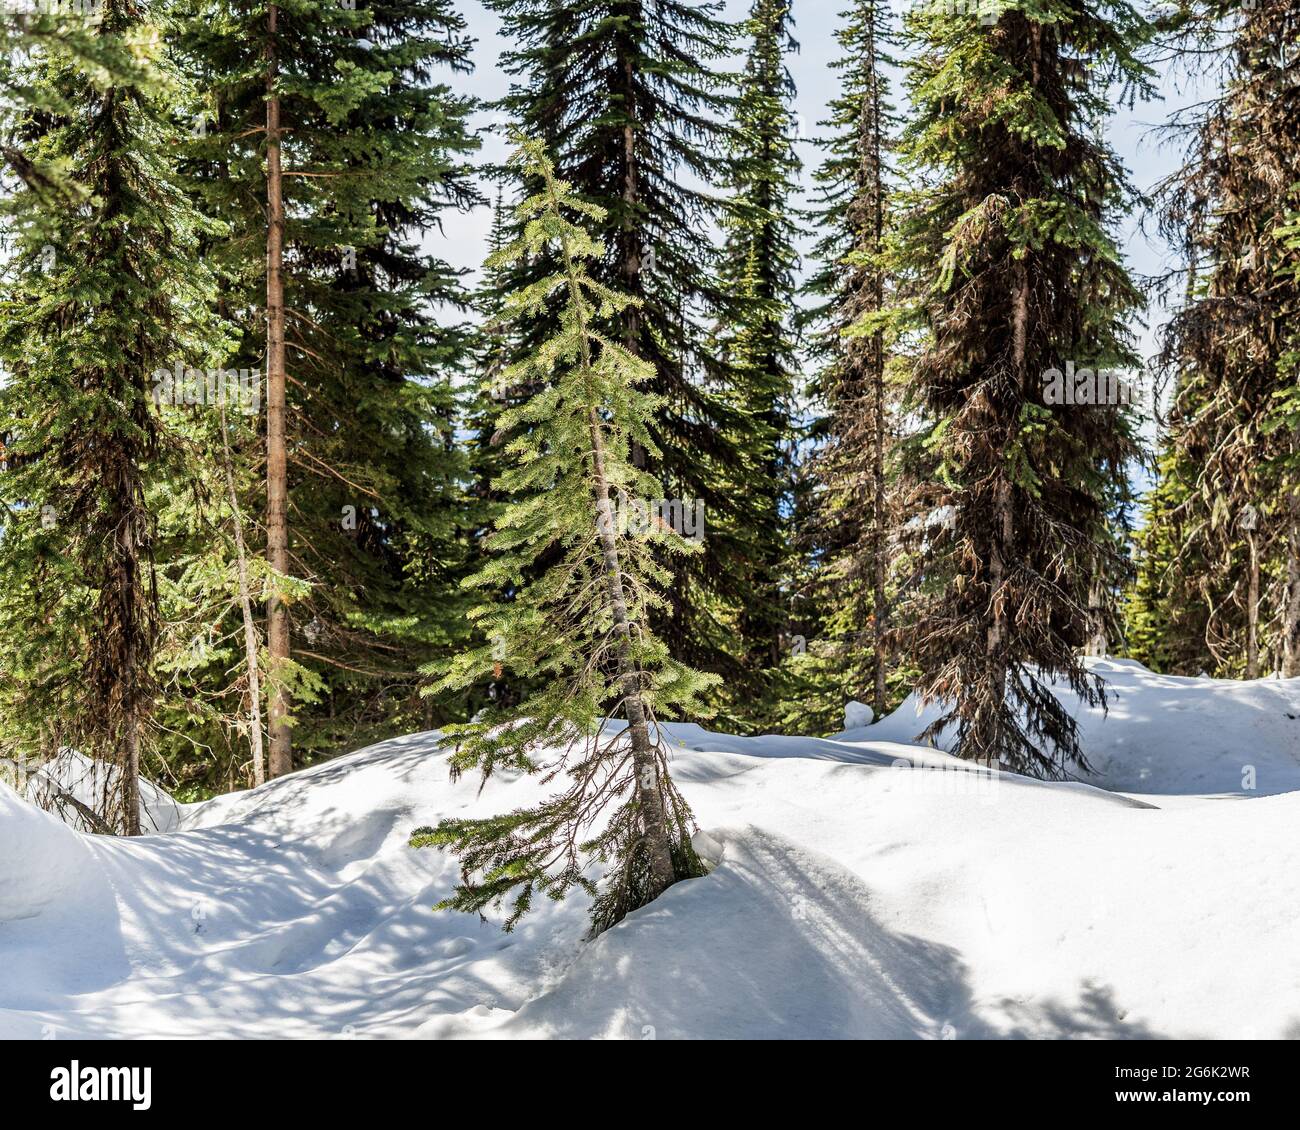 Young conifers in the forest land covered in snow early spring sunny day. Stock Photo